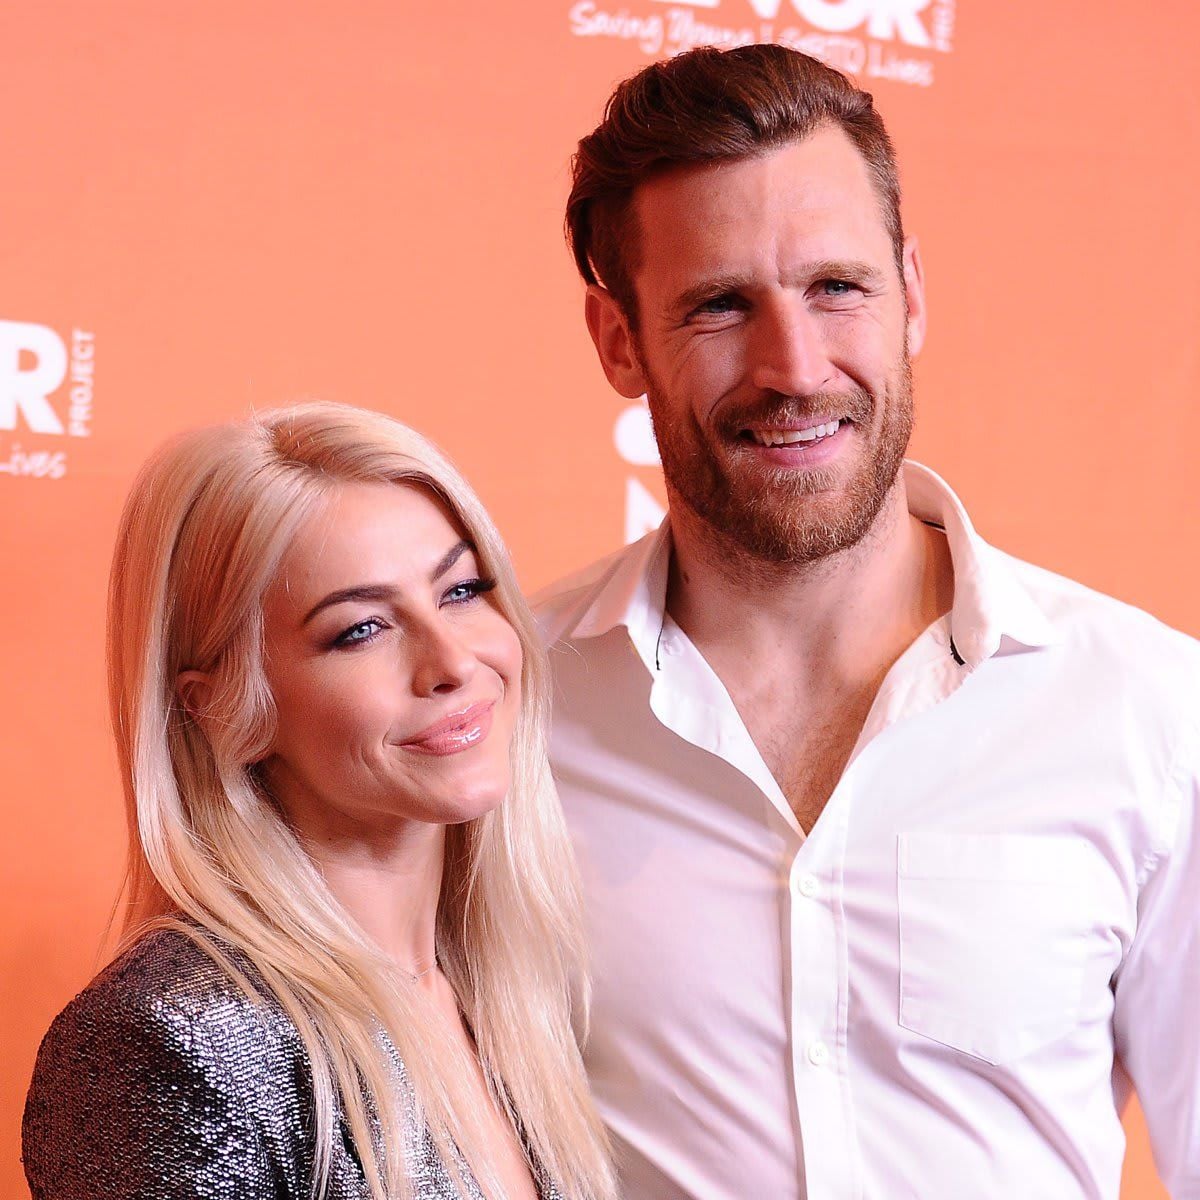 Actress Julianne Hough and husband Brooks Laich attend The Trevor Project's 2017 TrevorLIVE LA